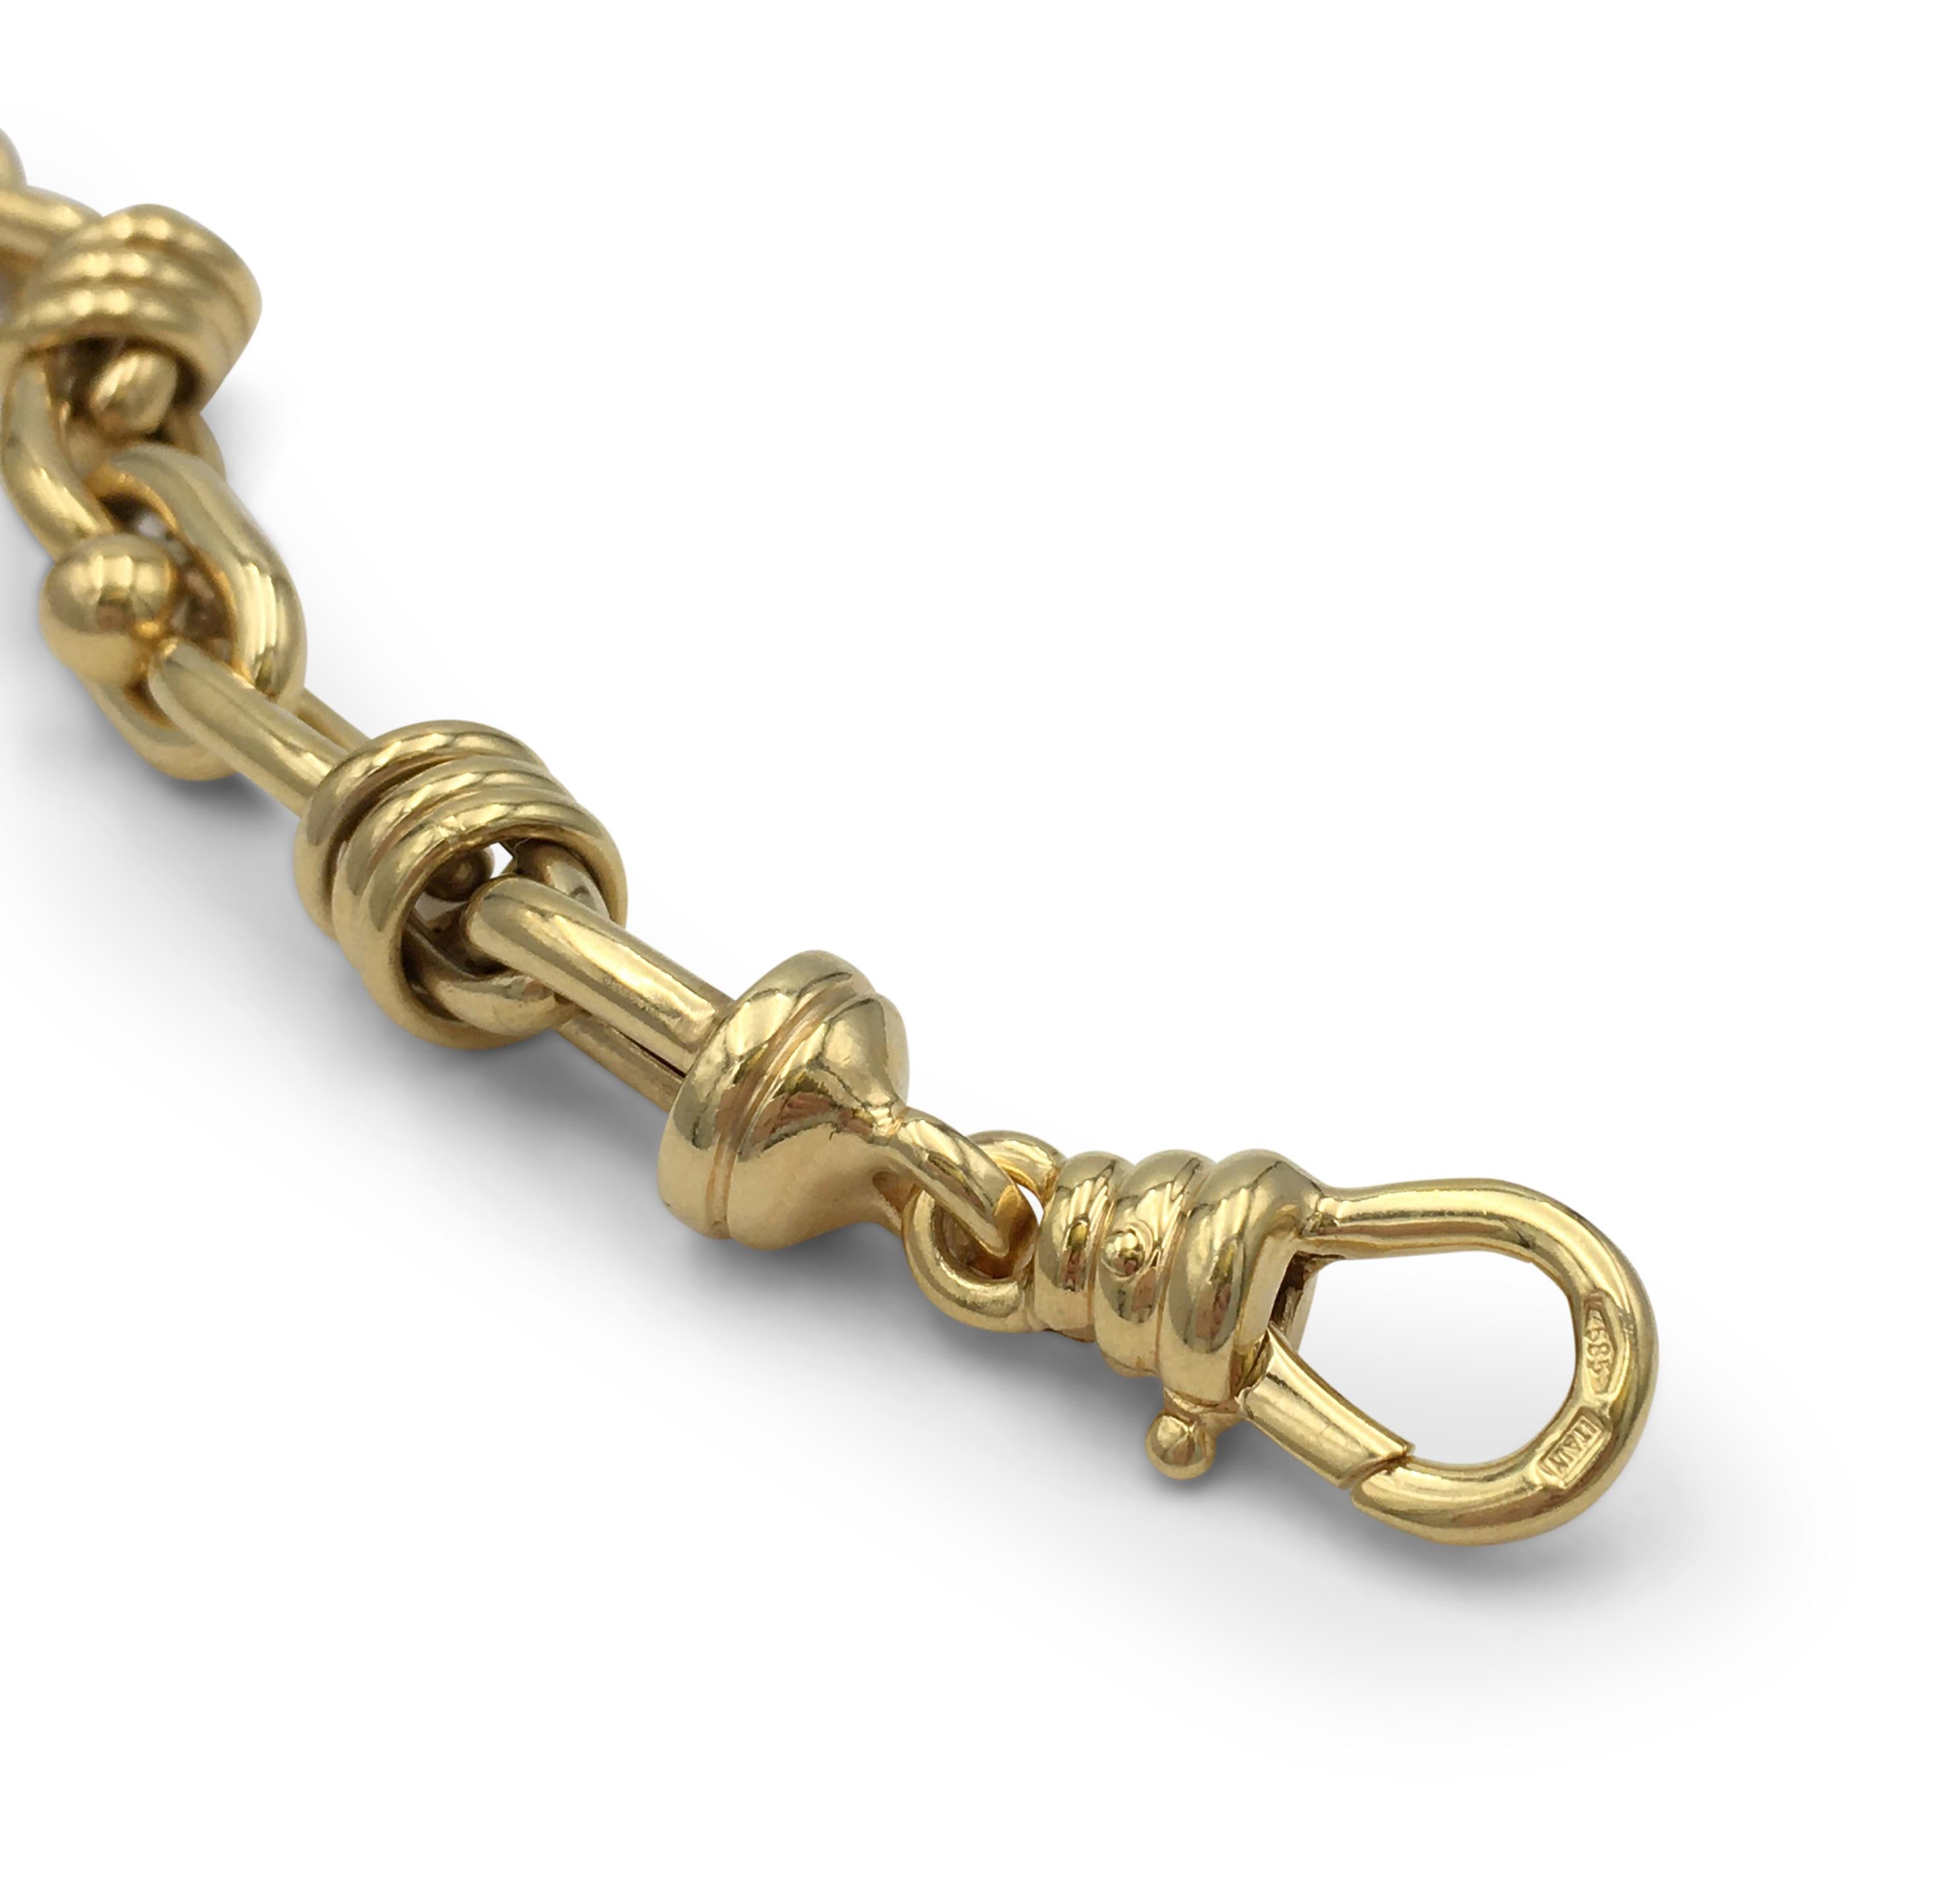 Fancy linked bracelet with lobster clasp crafted in 14 karat yellow gold. The bracelet is 7 inches in length and weighs 21.0 grams. Bracelet does not come with original box. Stamped 585, Italy. CIRCA 2010s. 